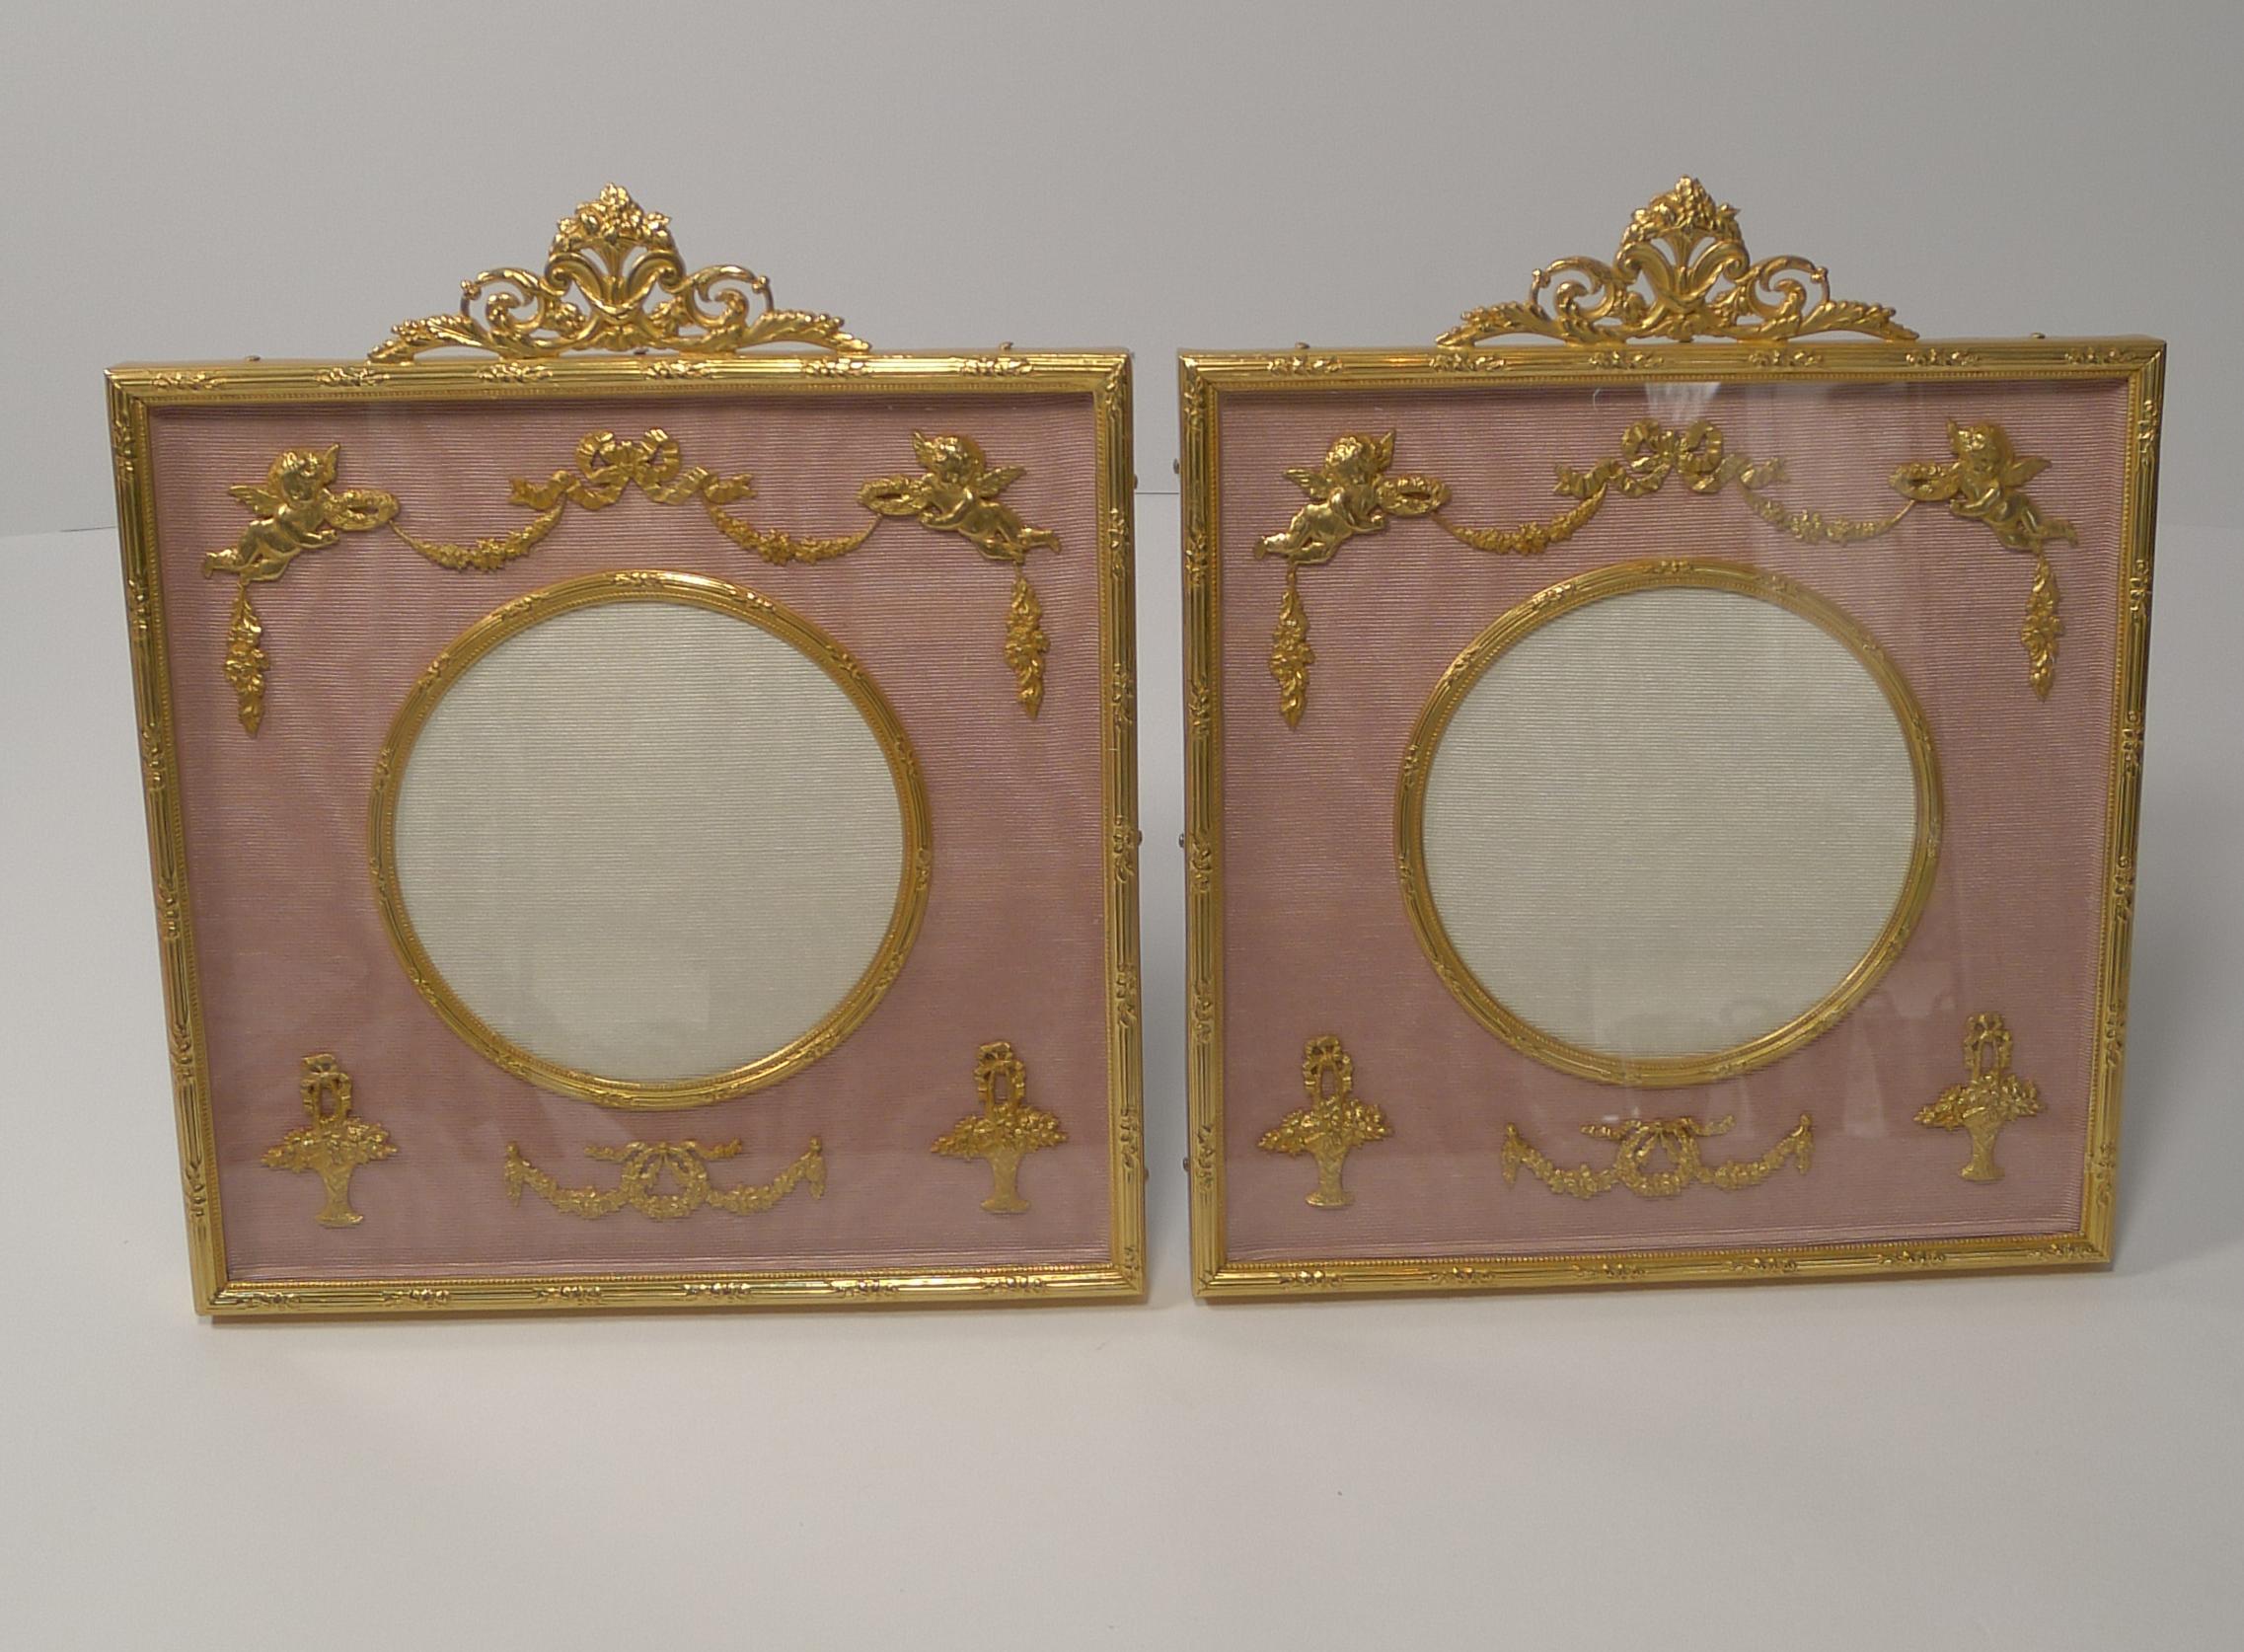 A stunning pair of antique French photograph frames made from Ormolu, bronze smothered in gold.

They have been professionally re-finished, restoring them to their former glory, dating to circa 1900.

Behind the glazed front, there are stunning